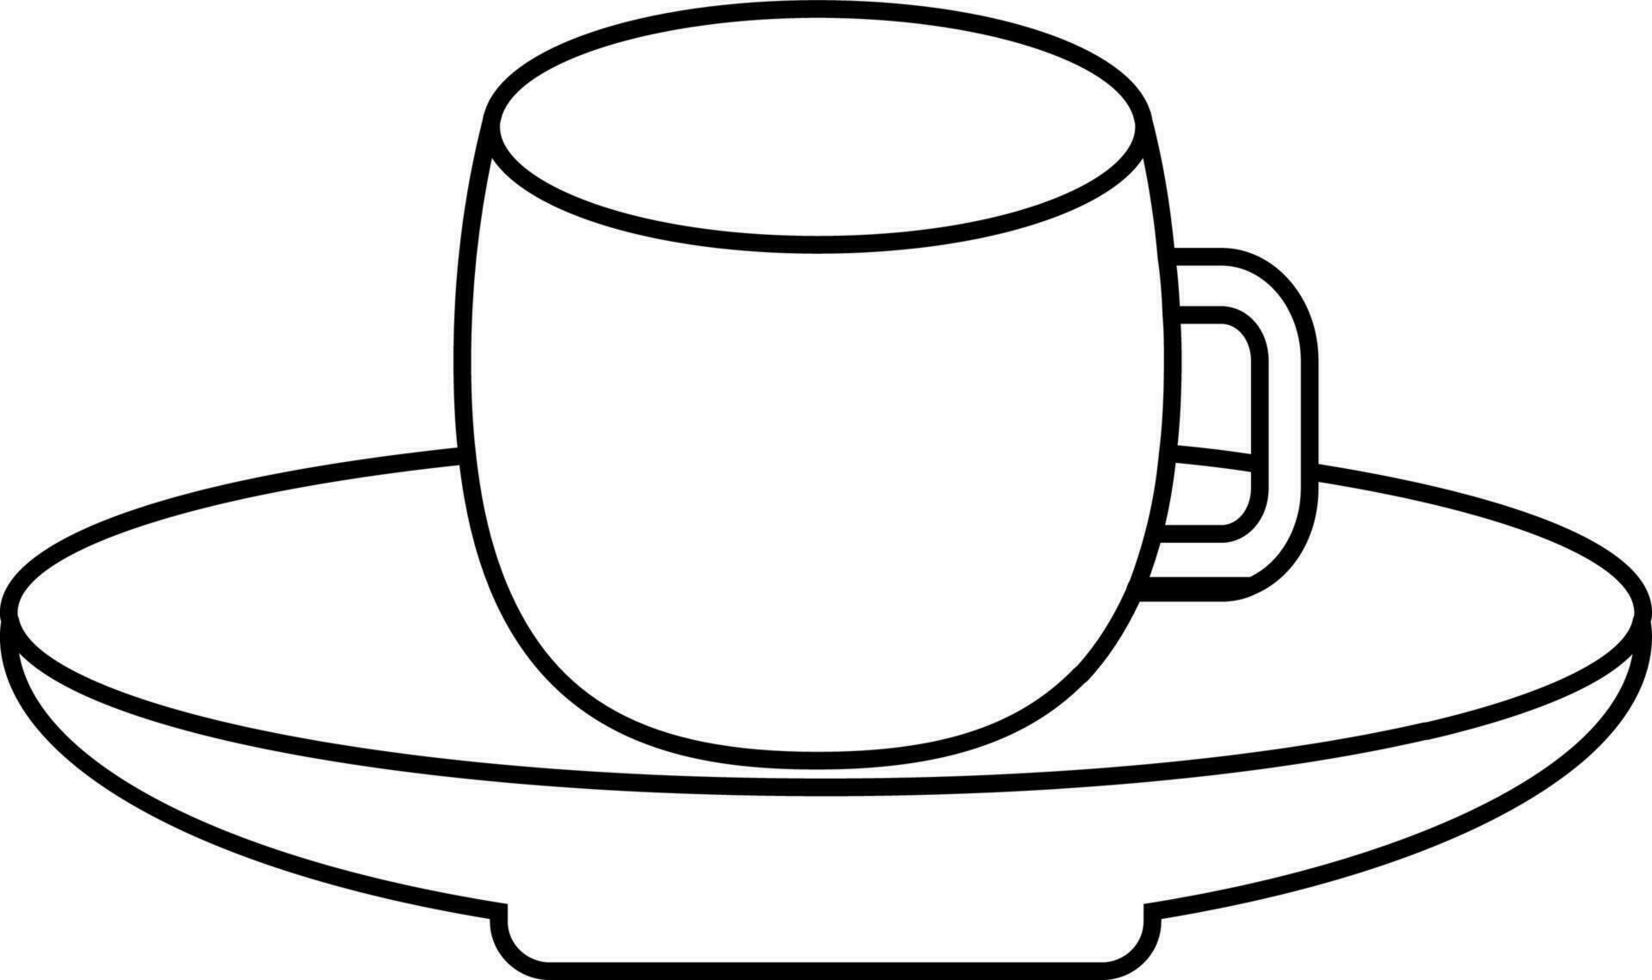 Black line art cup on palte in flat style. vector